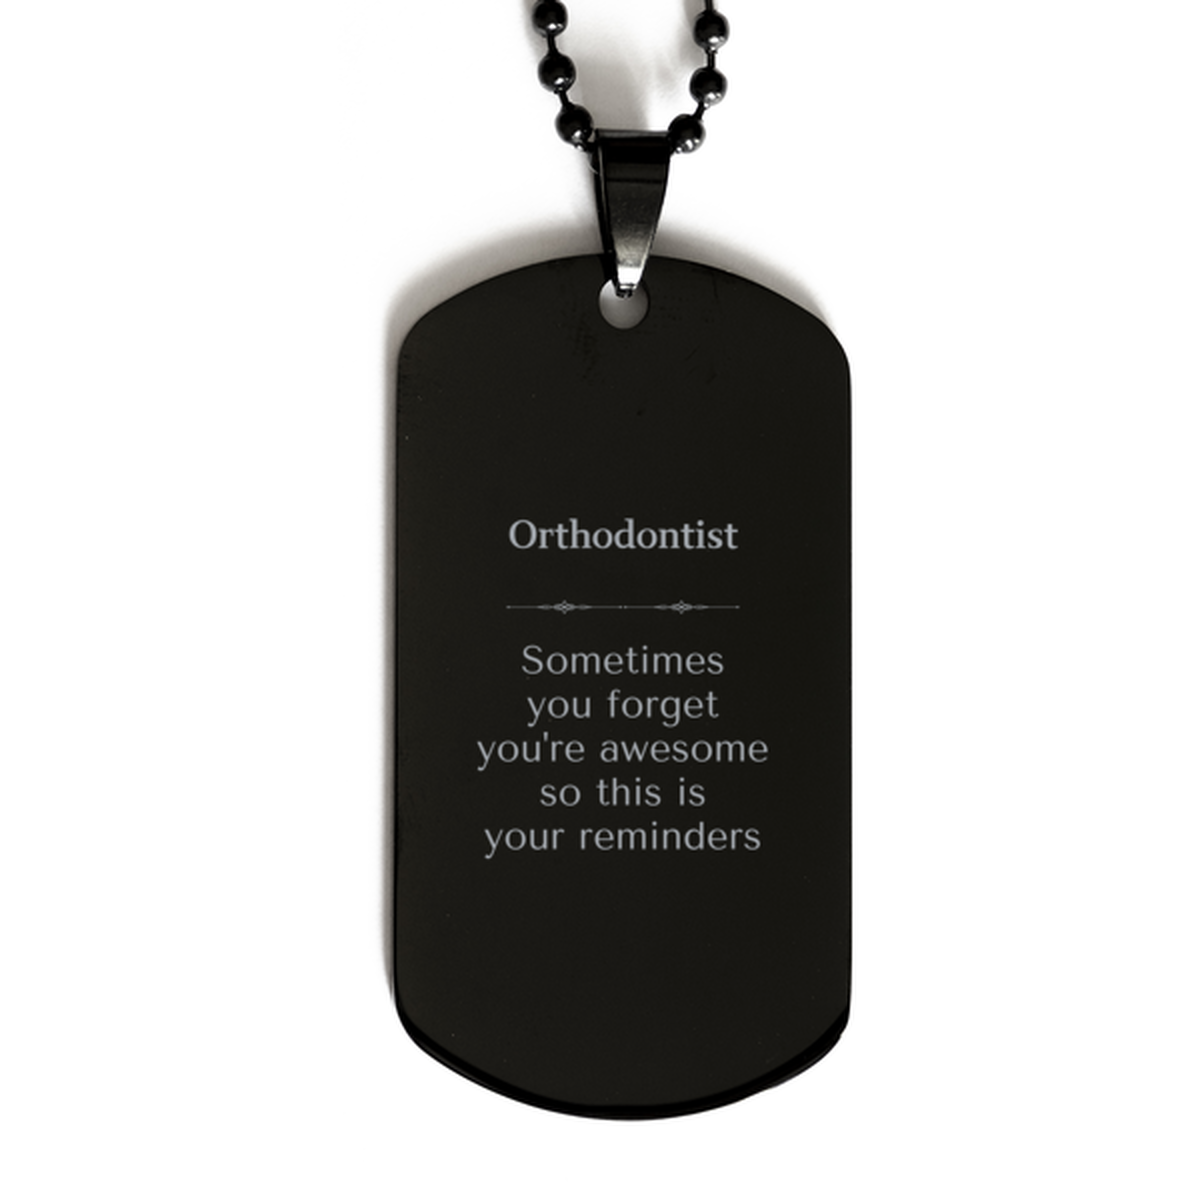 Sentimental Orthodontist Black Dog Tag, Orthodontist Sometimes you forget you're awesome so this is your reminders, Graduation Christmas Birthday Gifts for Orthodontist, Men, Women, Coworkers